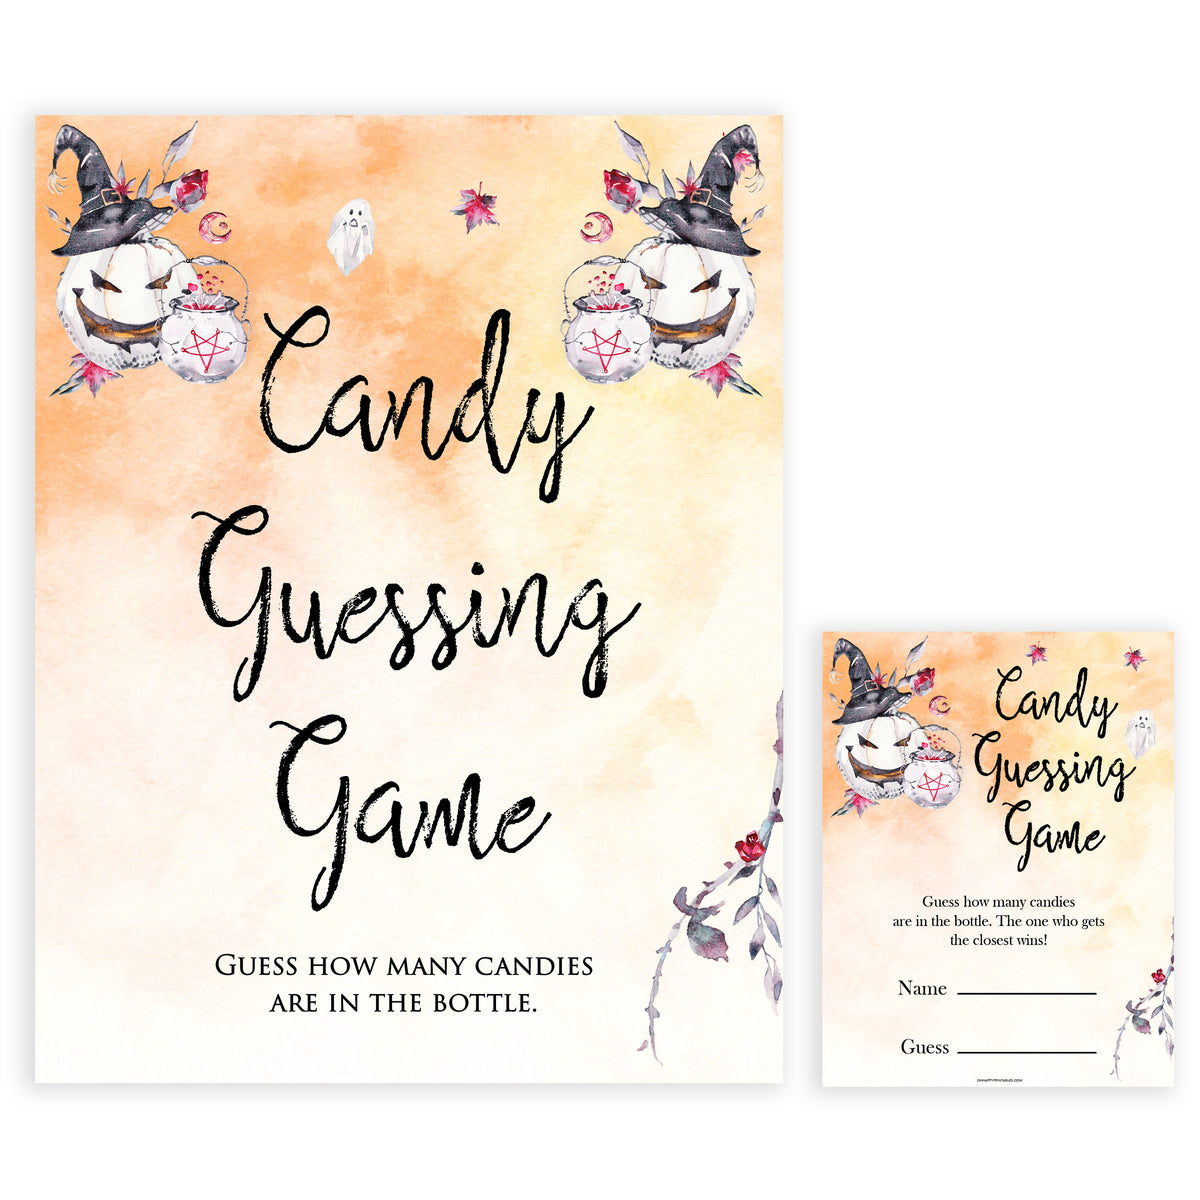 Candy Guessing Game Free Printable Halloween